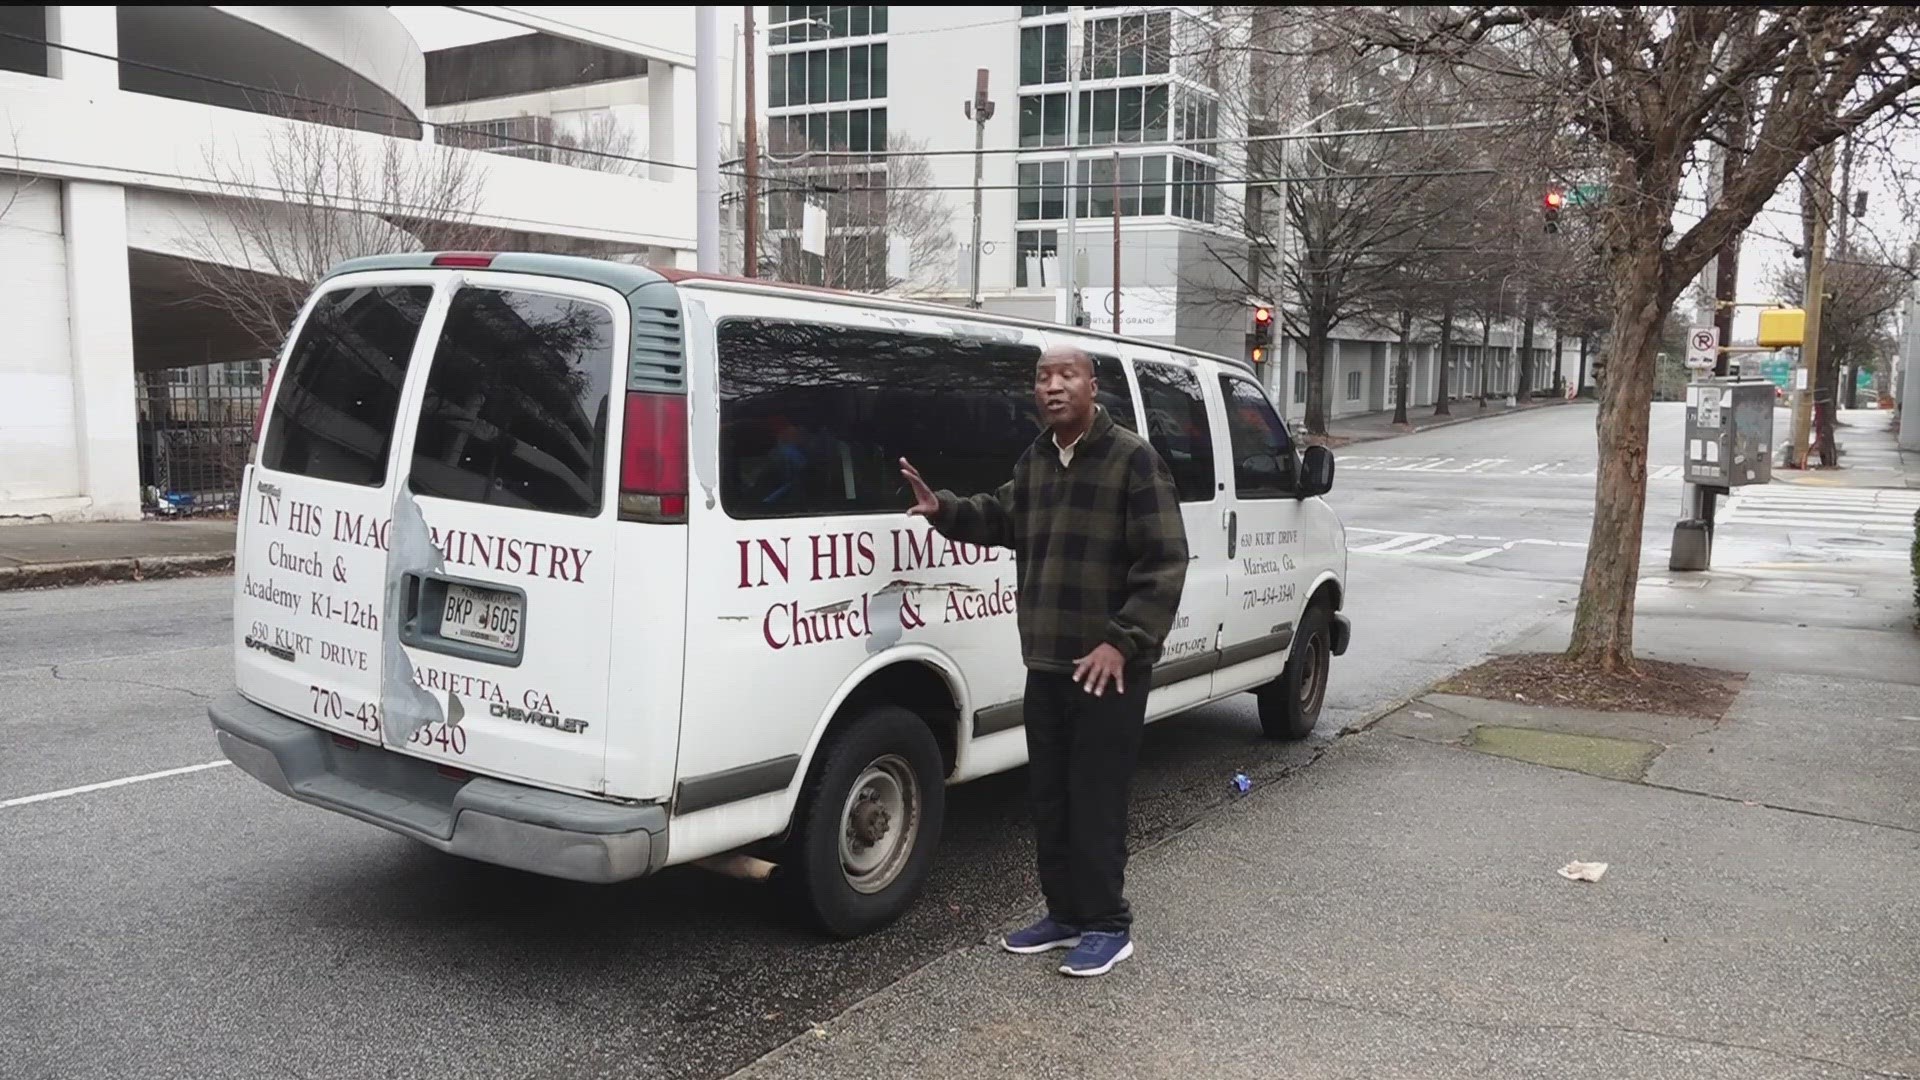 While most stay inside to keep warm, this Atlanta man hits the streets to help others.